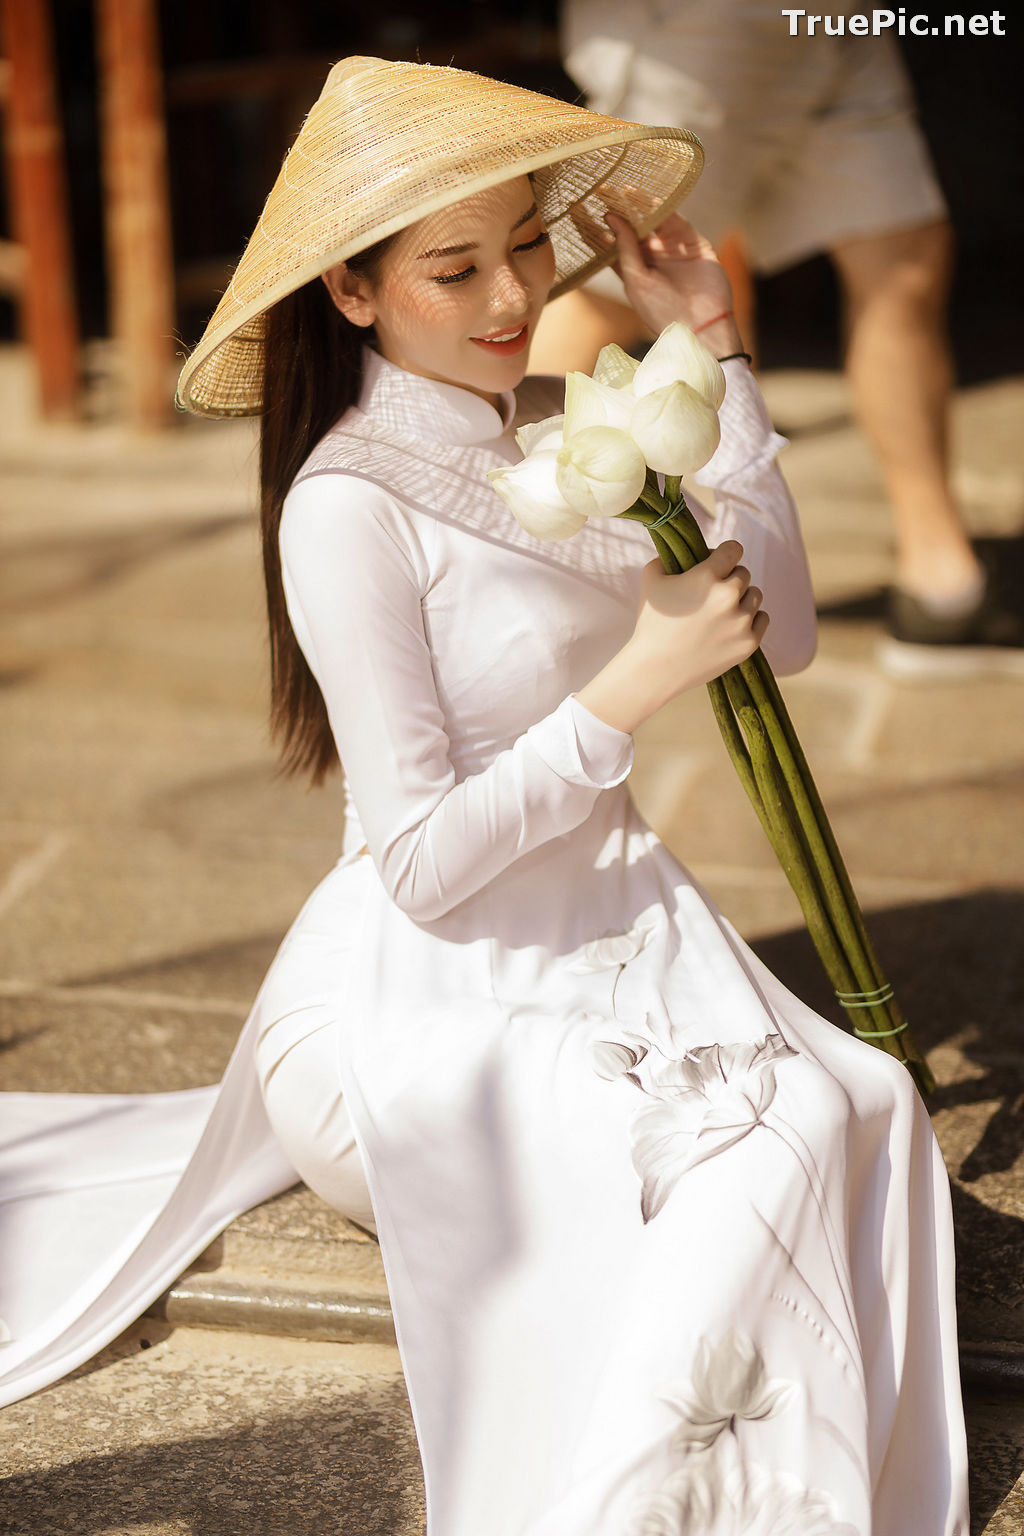 Image The Beauty of Vietnamese Girls with Traditional Dress (Ao Dai) #2 - TruePic.net - Picture-71